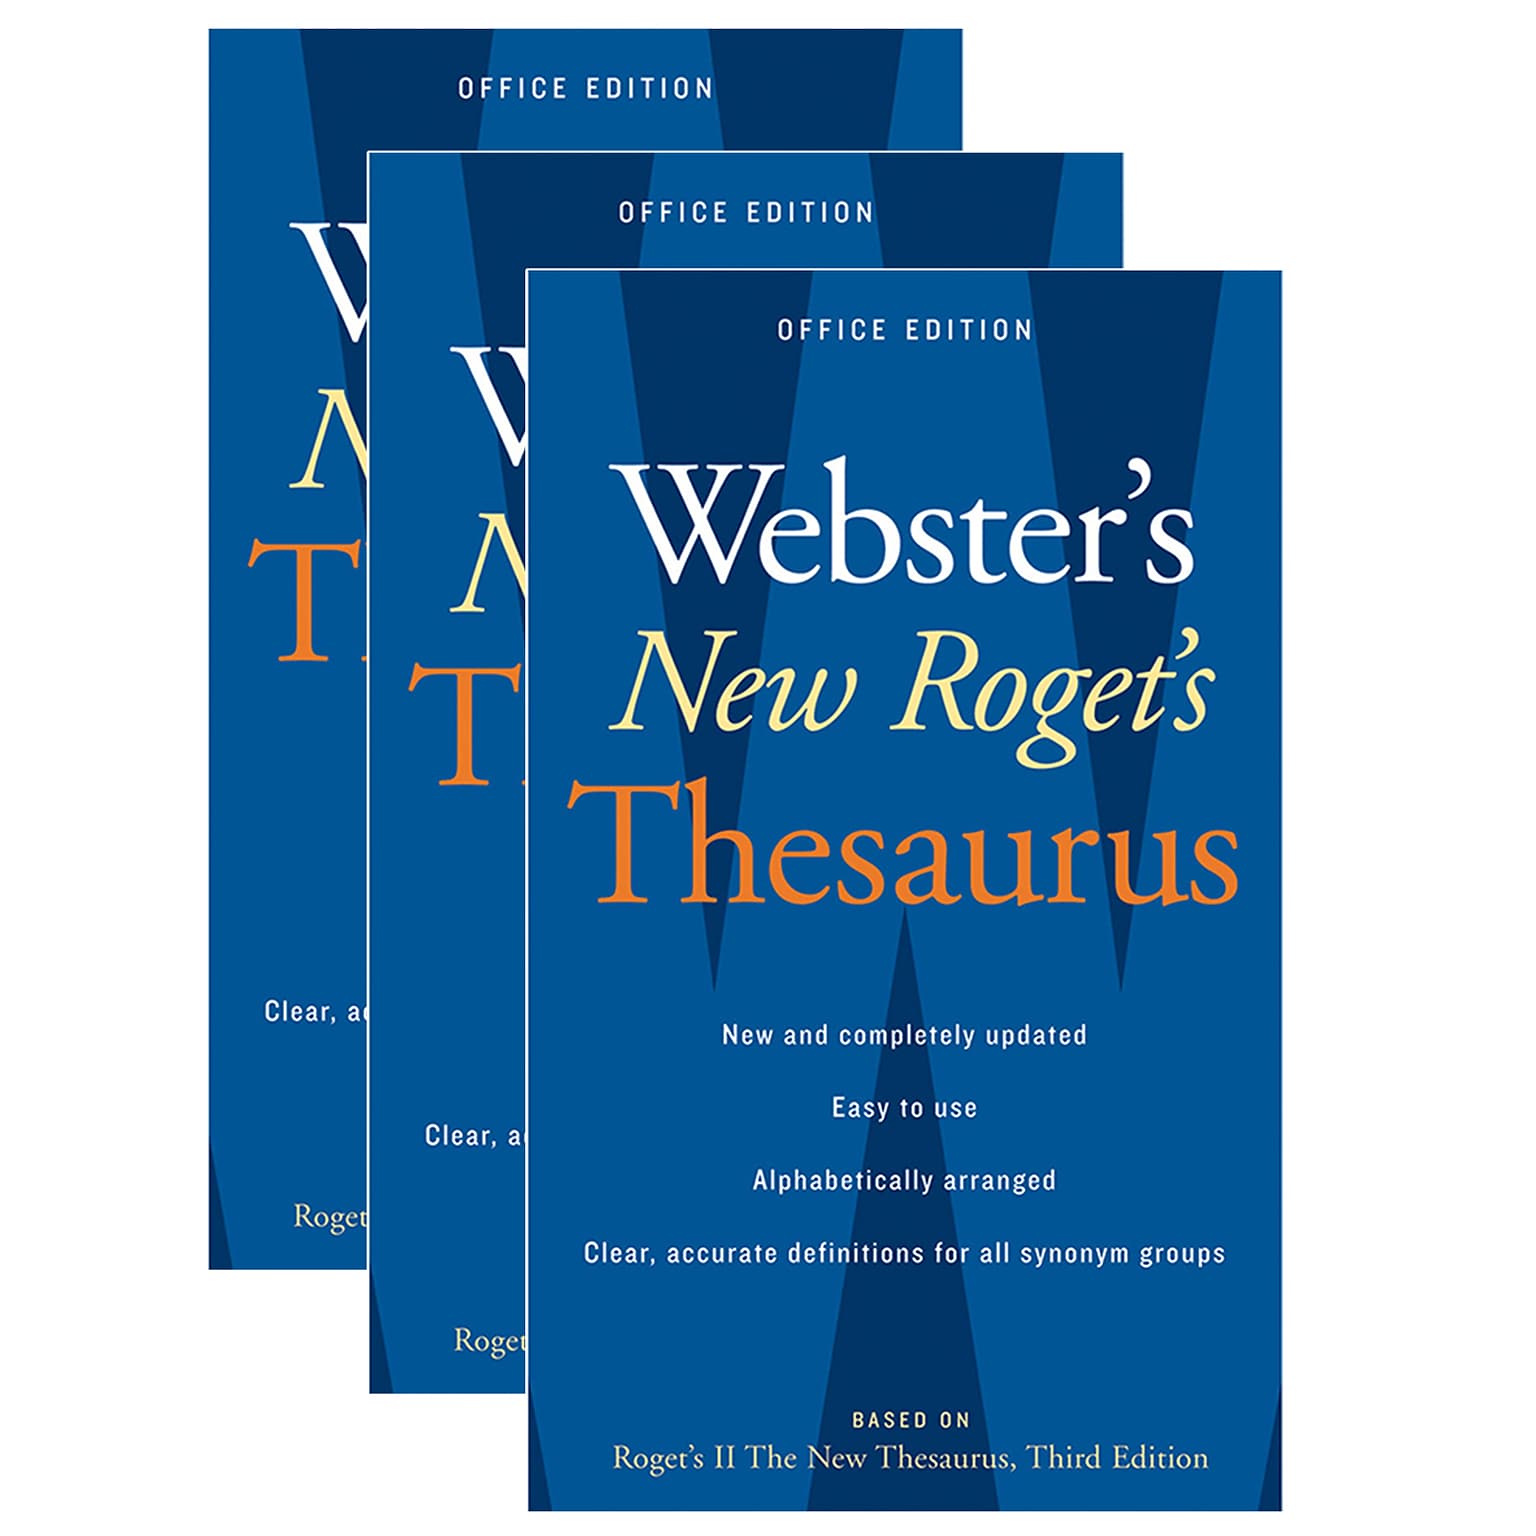 Houghton Mifflin Harcourt Websters New Rogets Thesaurus, Office Edition, Pack of 3 (AH-9780618955923-3)